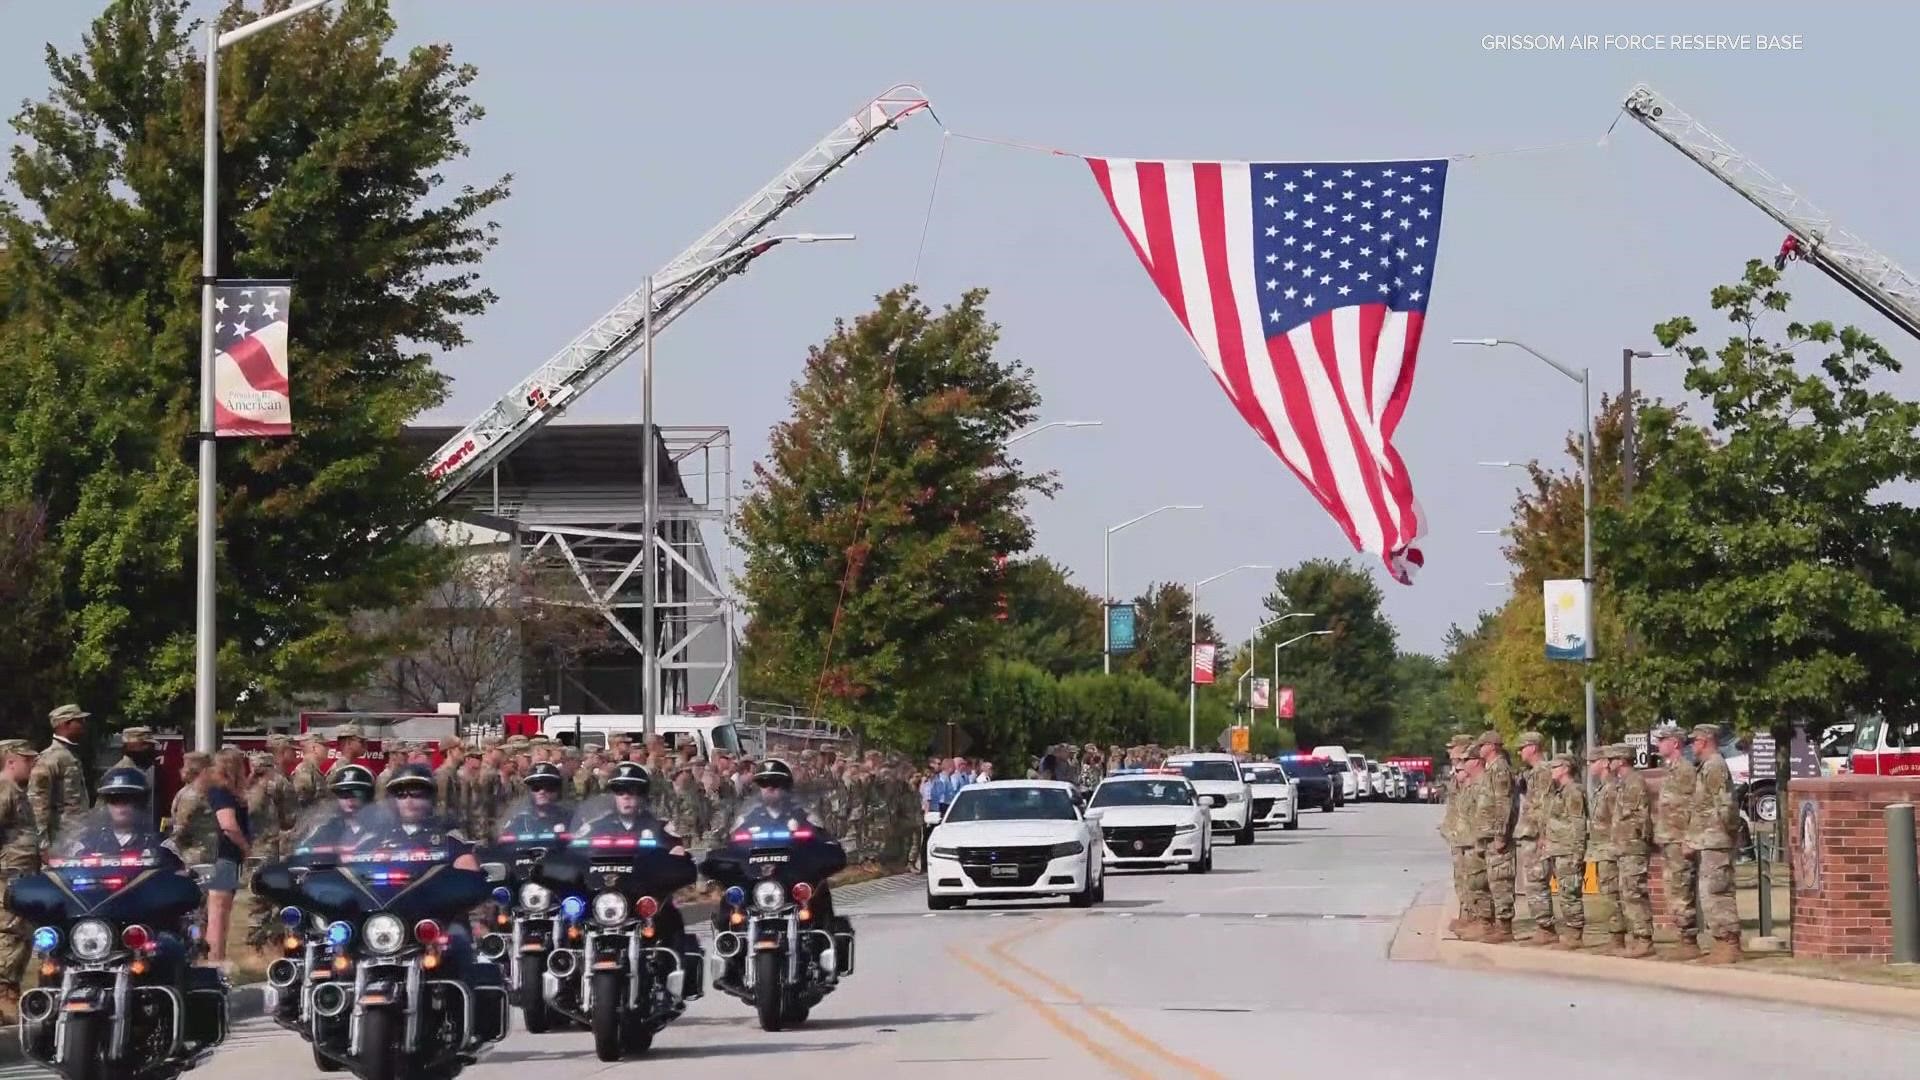 A crowd of military members saluted as the hearse carrying the remains of Cpl. Humberto Sanchez passed by on its way to bring the fallen Marine home.